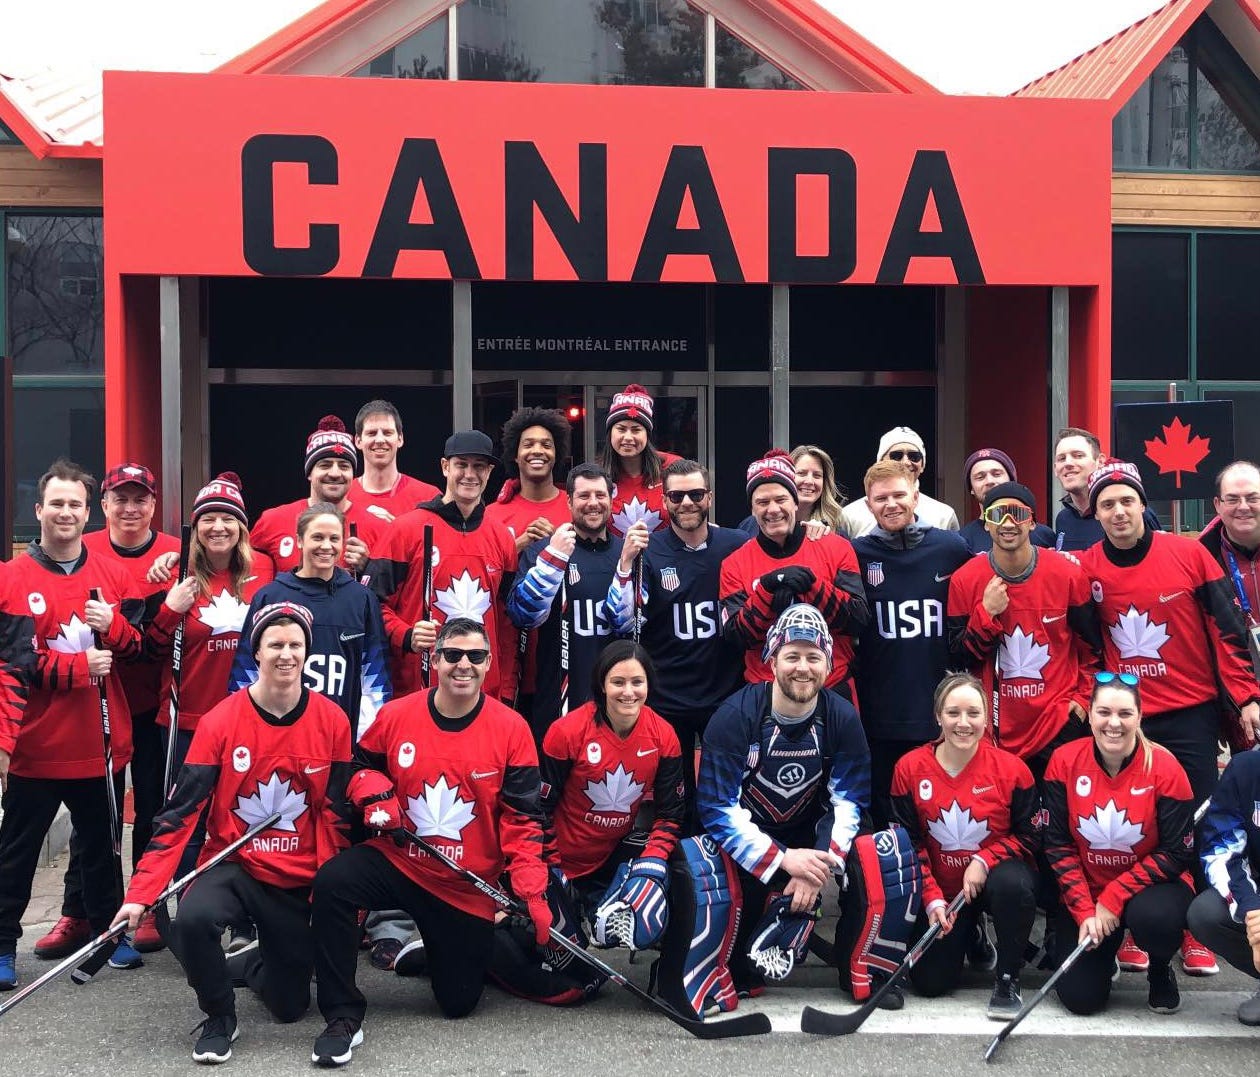 Athletes and officials from the Canadian and U.S. Olympic teams commemorate their ball hockey showdown on Friday at the Winter Olympics.